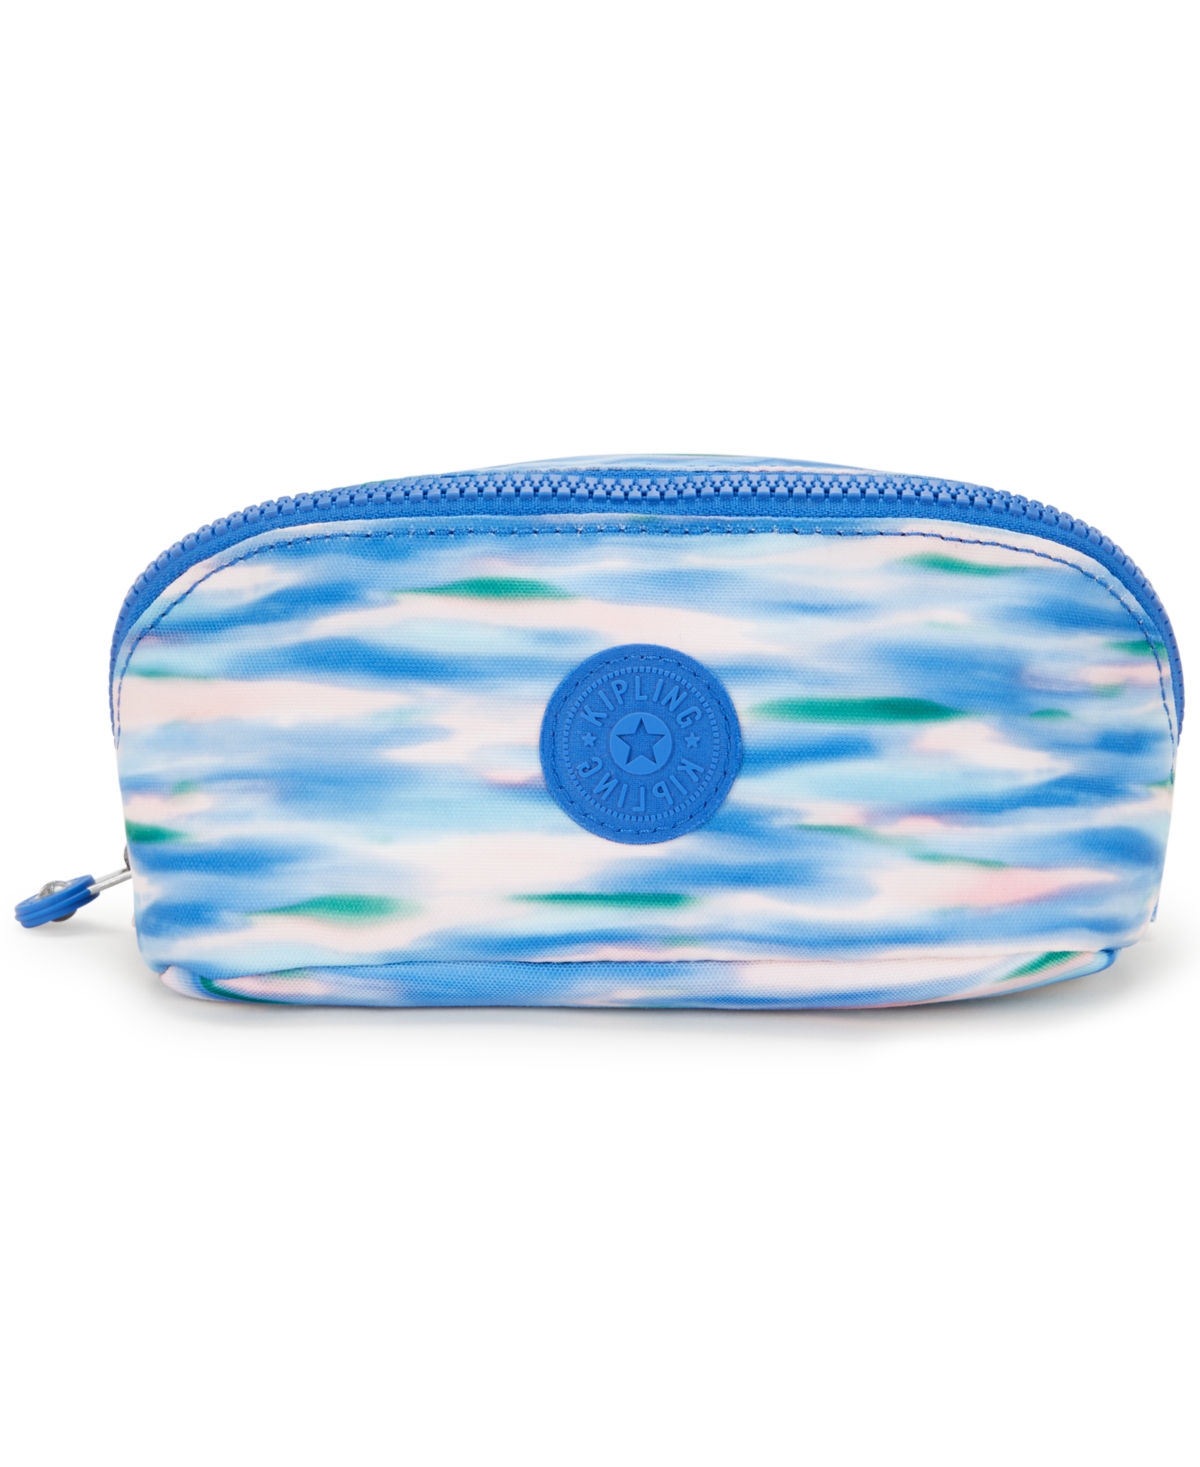 Mirko S Toiletry Bag - Diluted Blue